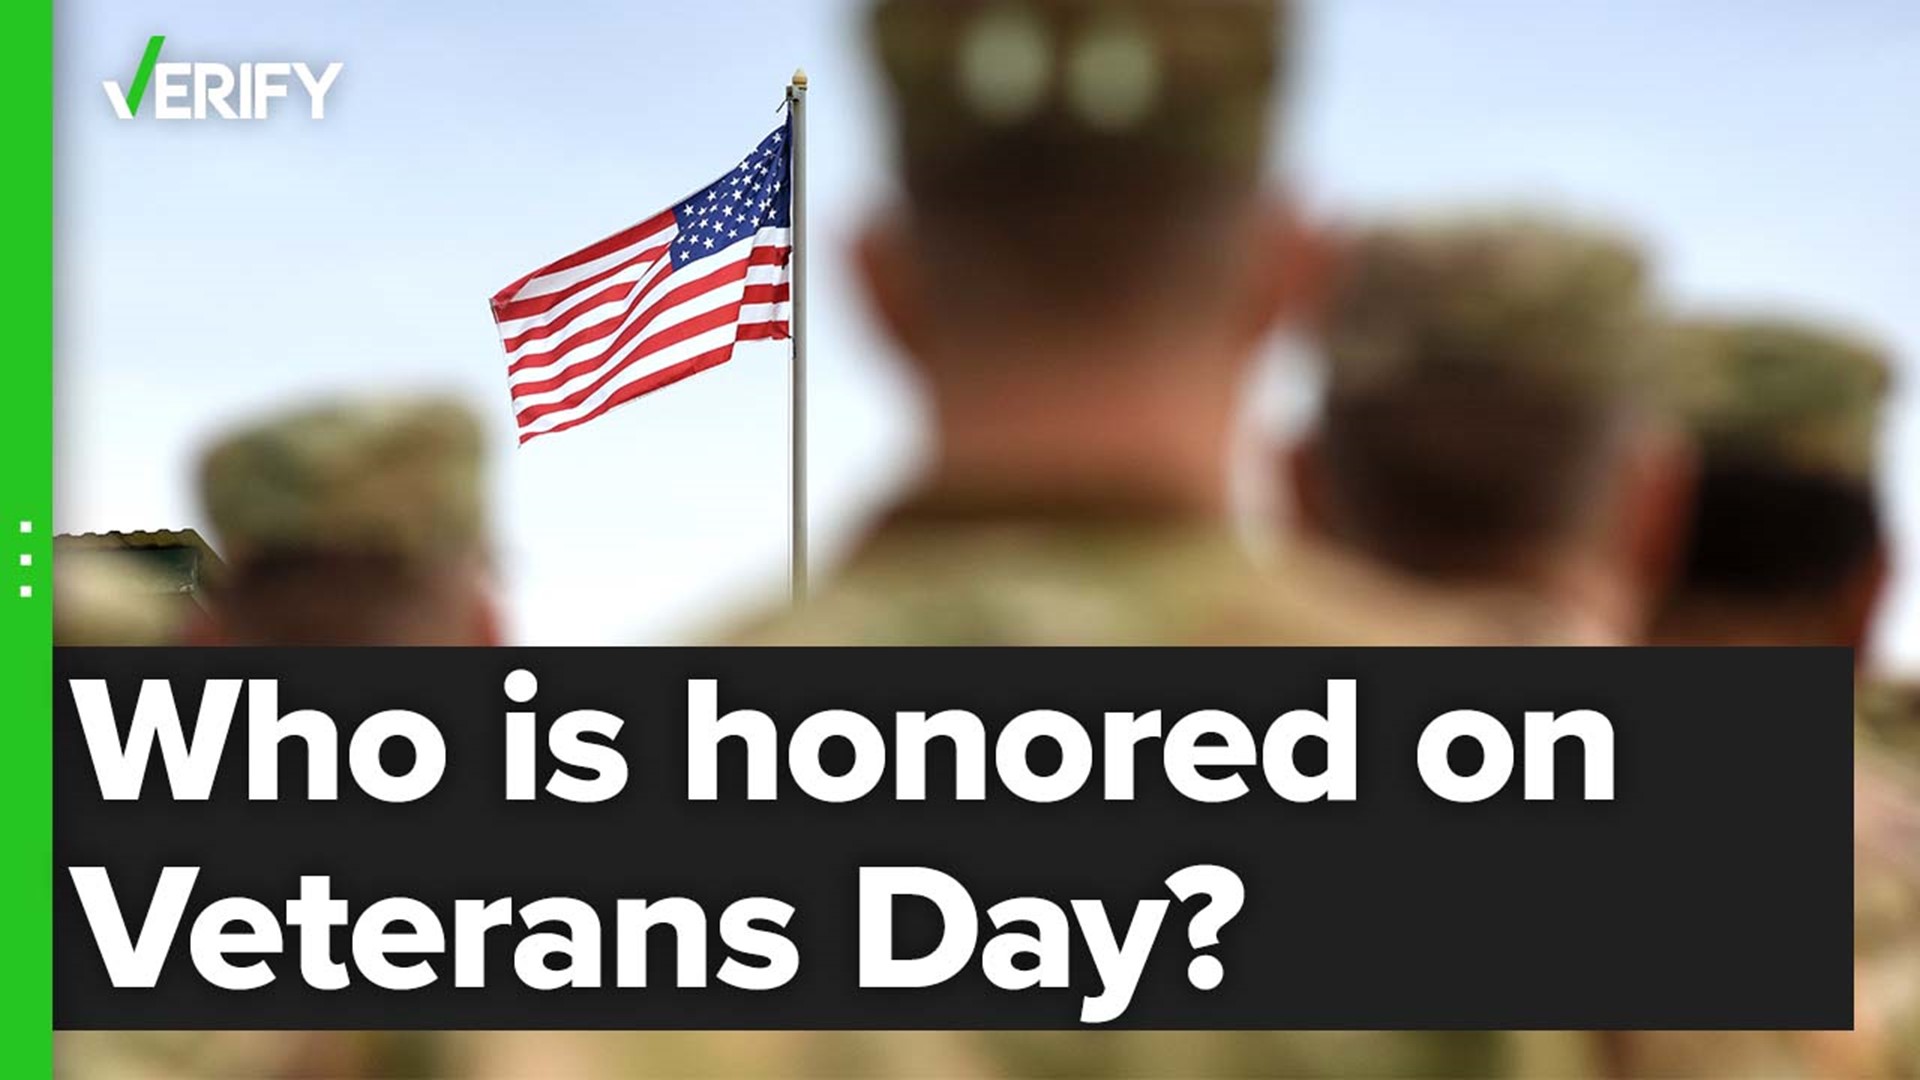 Veterans Day is intended to recognize men and women who previously served in the U.S. armed forces.